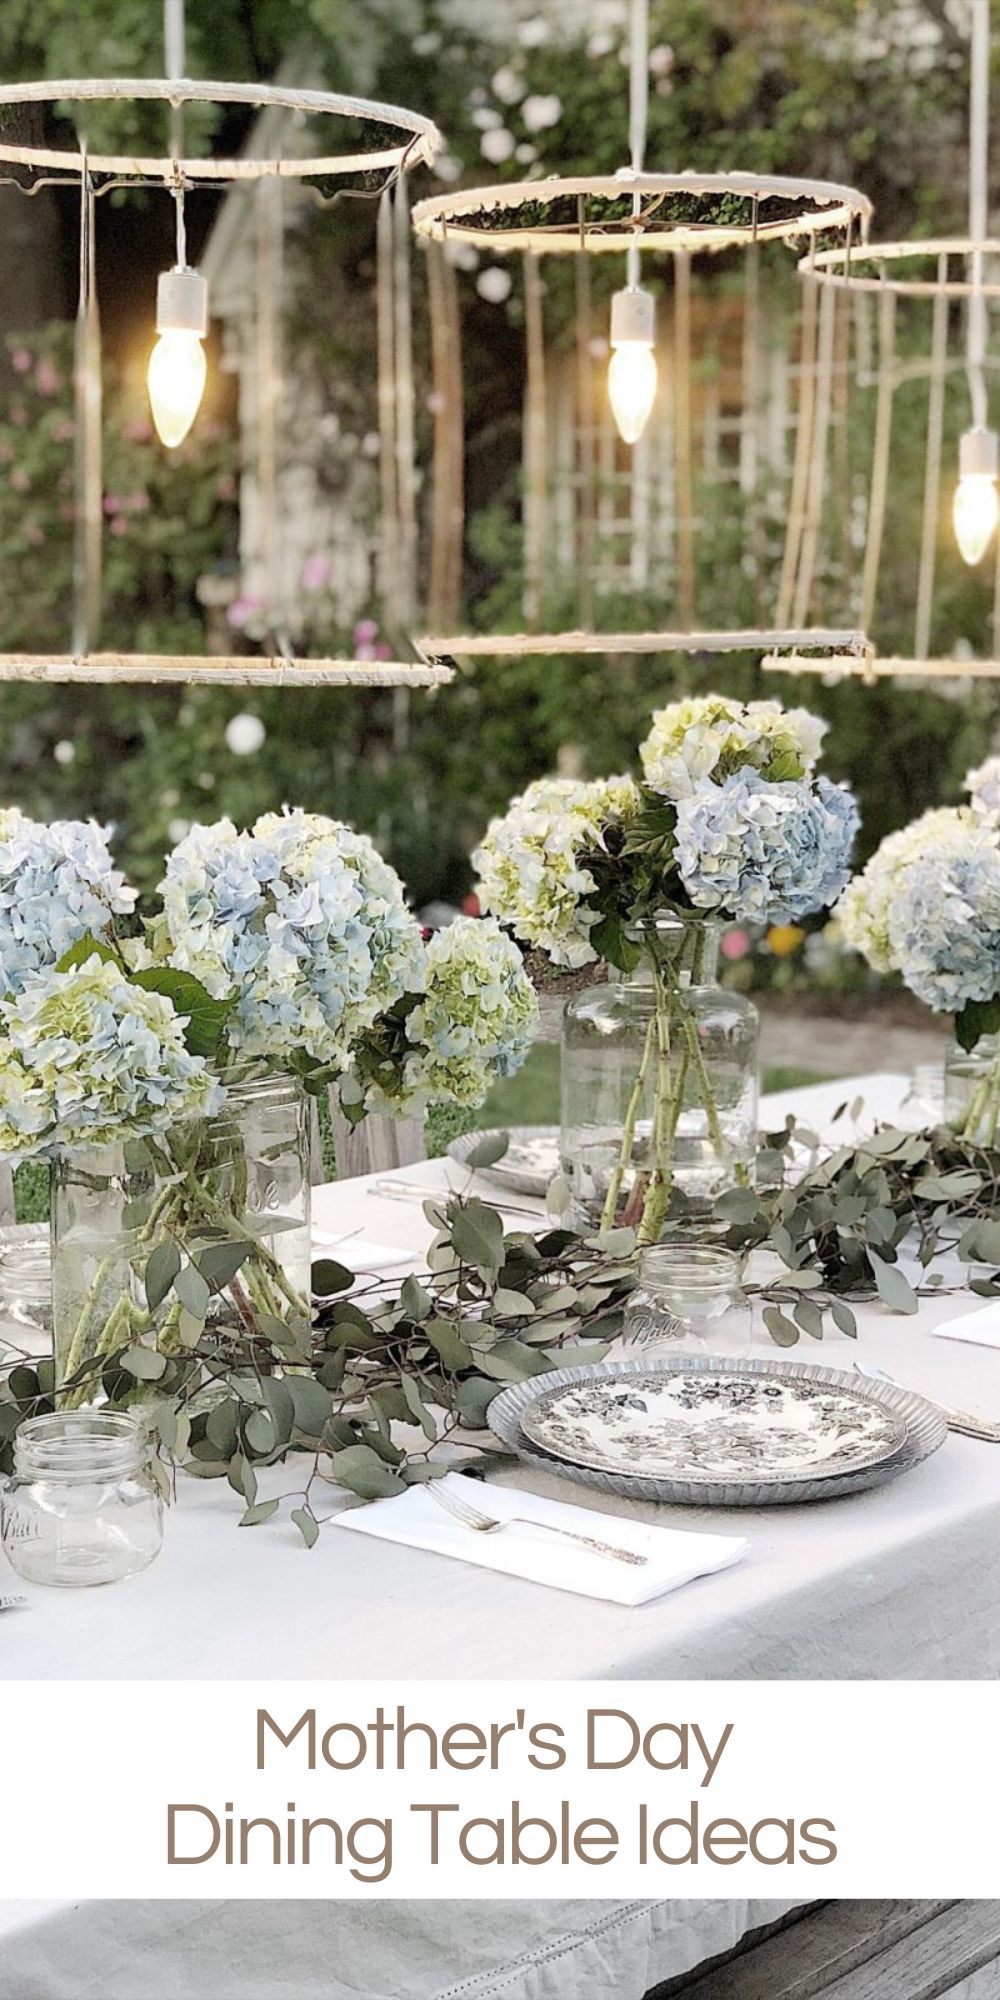 Mother’s Day is a day to celebrate all of the mothers in our lives. Here are some Mother's Day Dining Table ideas to help make the day easier.